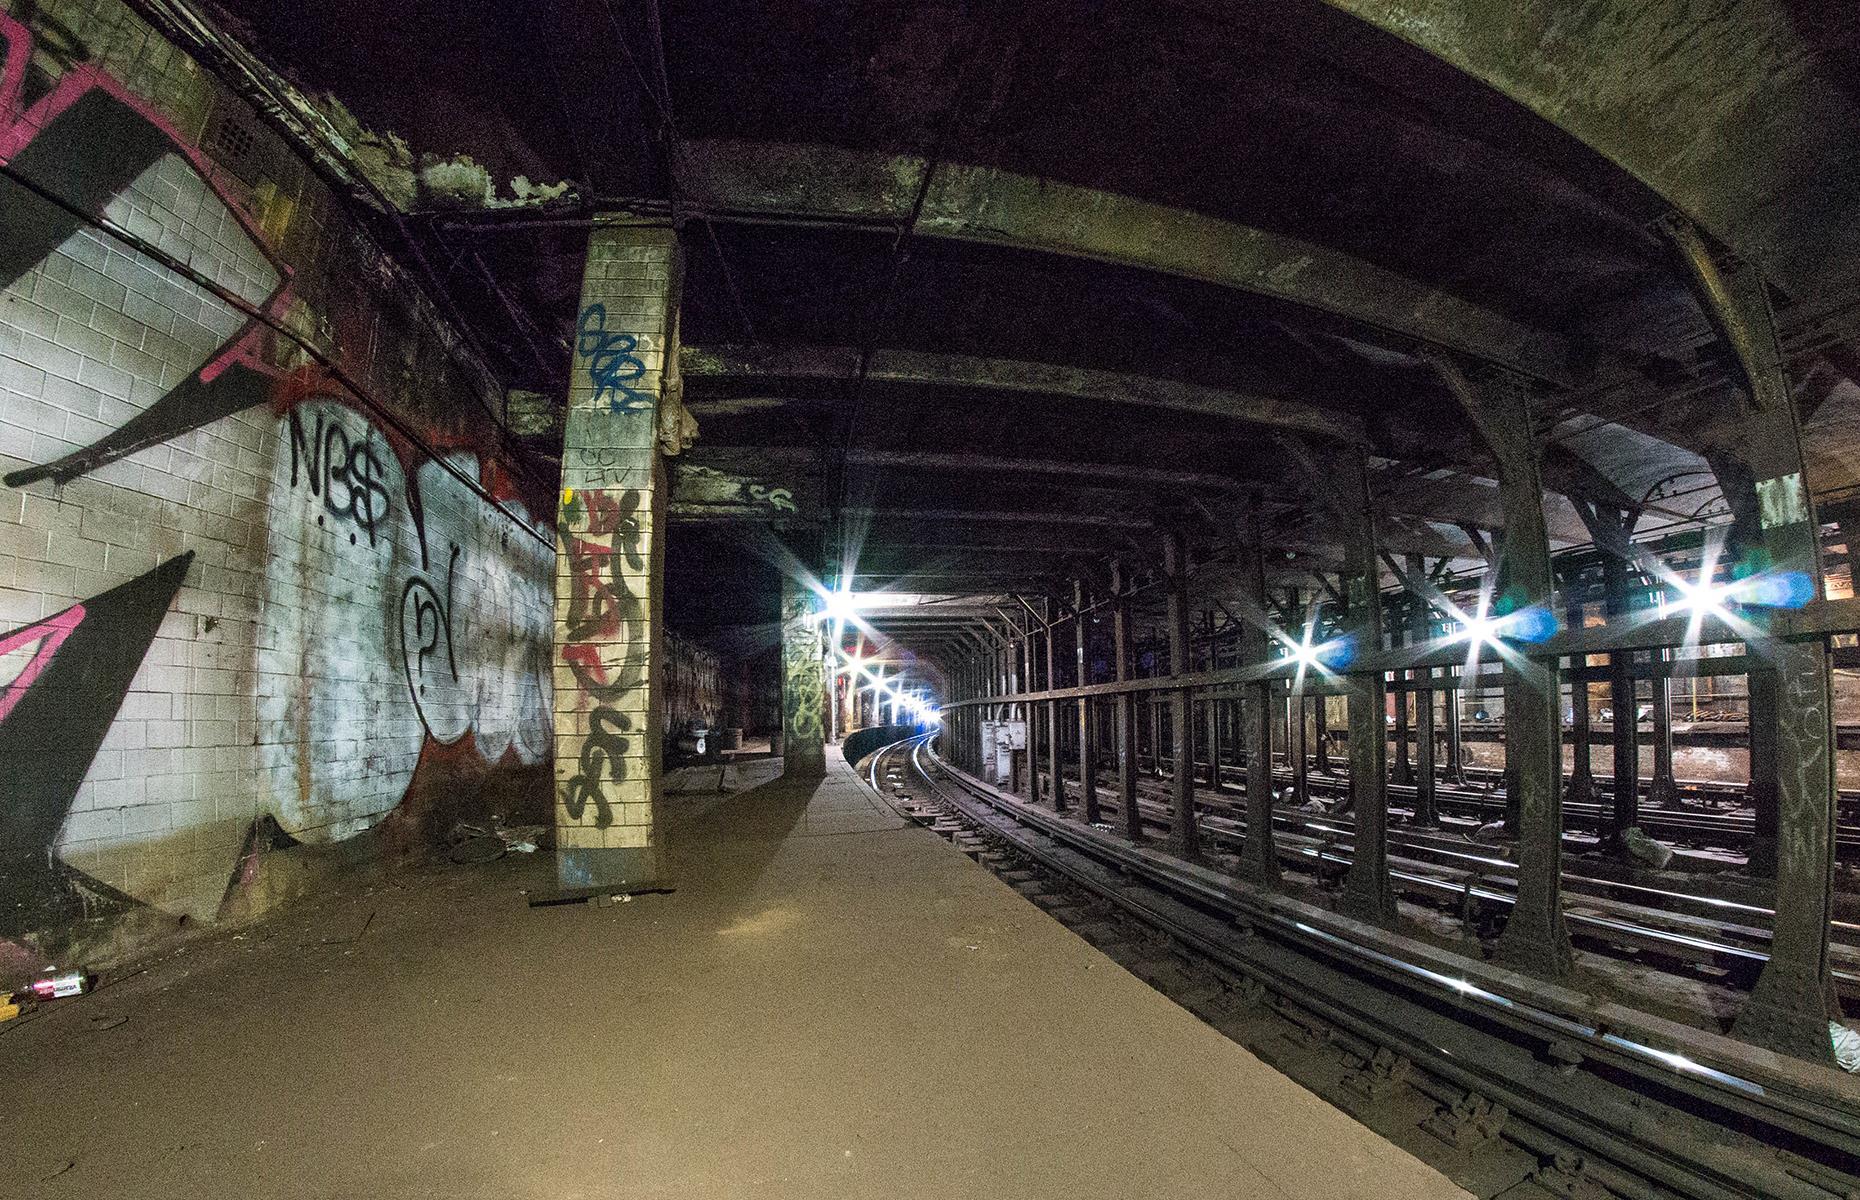 Abandoned Underground Stations With Intriguing Stories To Tell